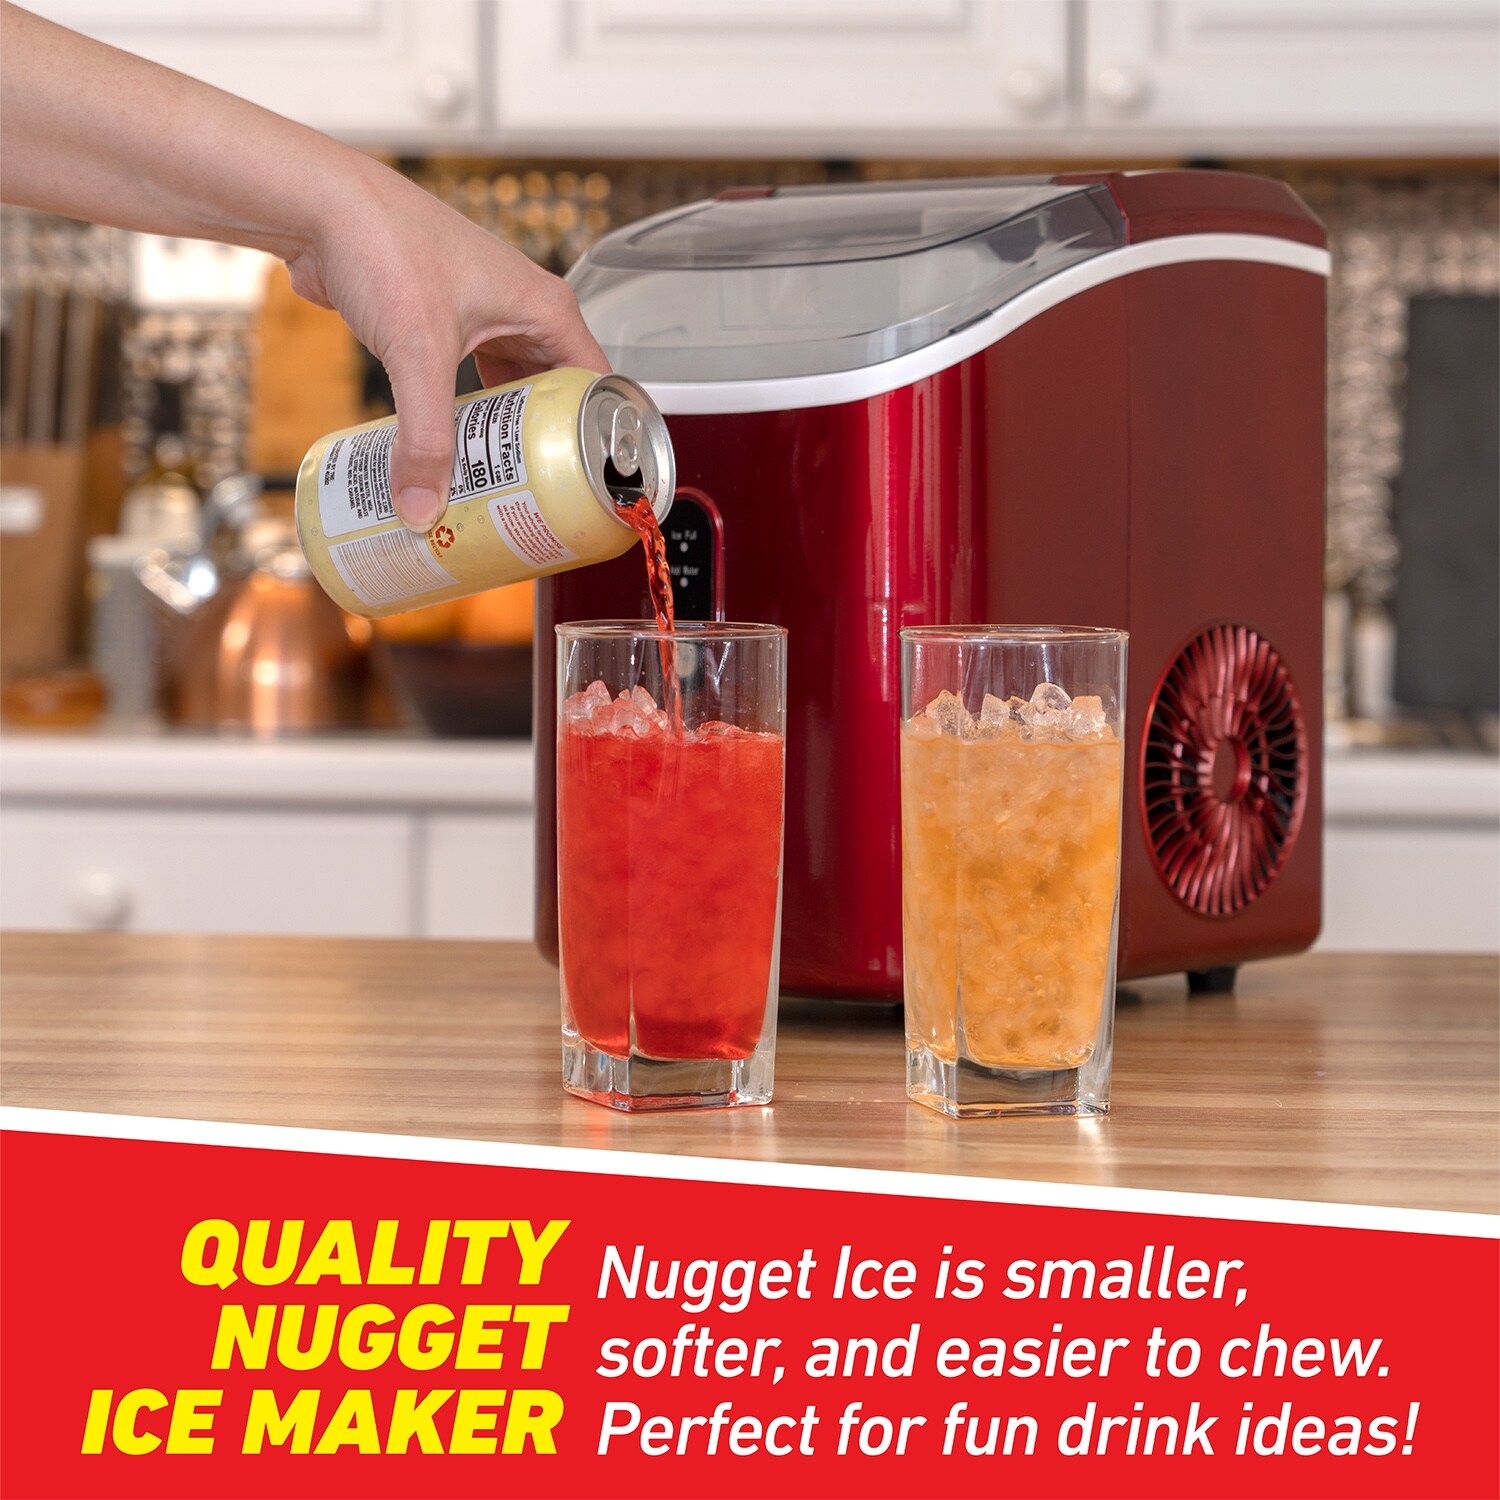 Deco Chef 33LB Nugget Ice Maker, 1 Press Auto Operation, Self Cleaning -  Bed Bath & Beyond - 37651069